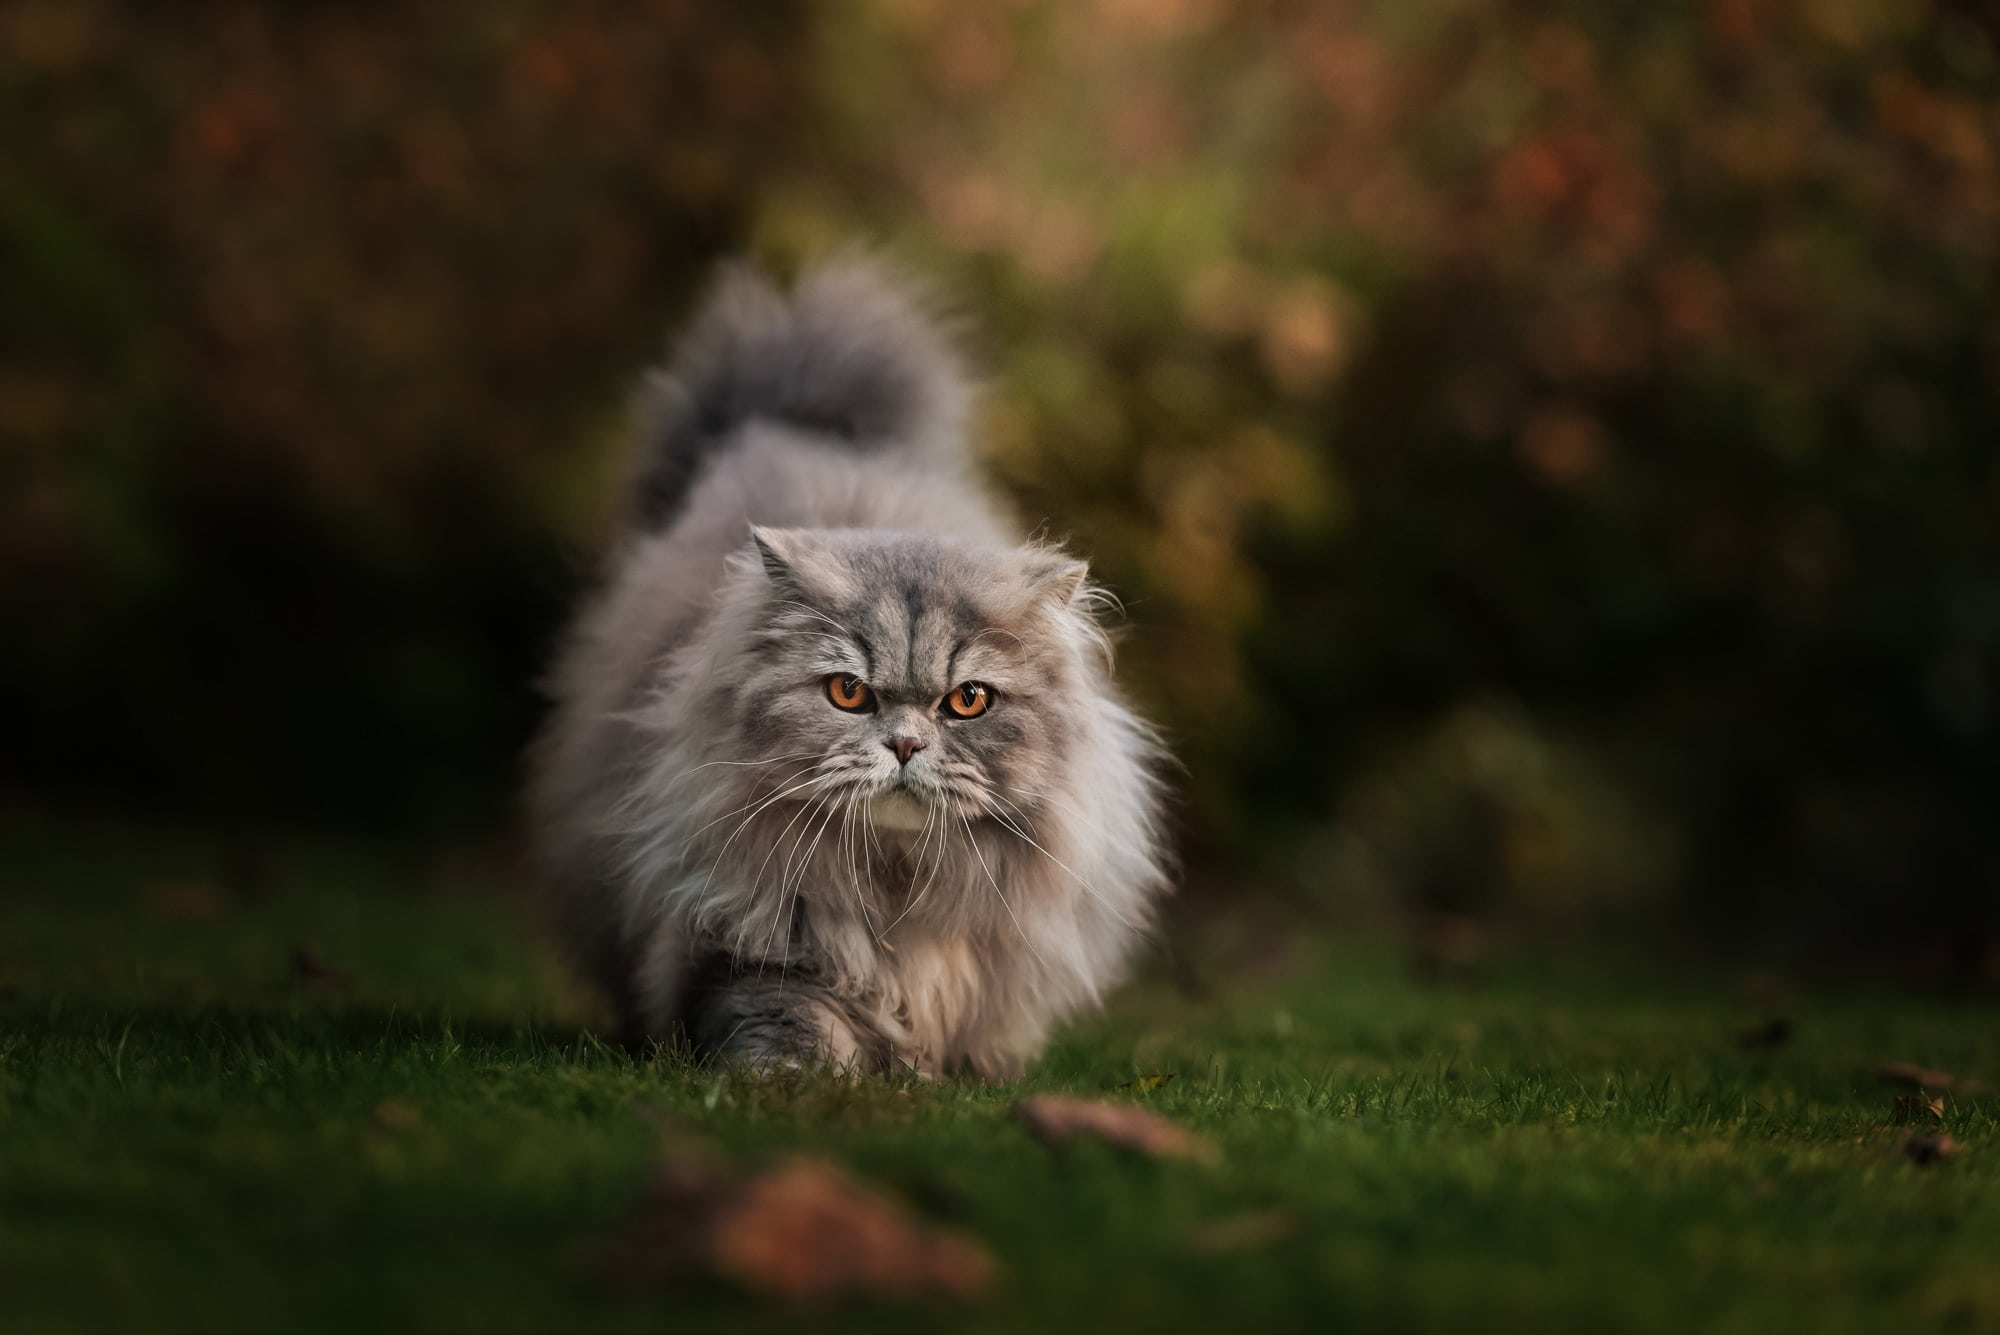 Nic Bisseker Photography cat photographer East Grinstead